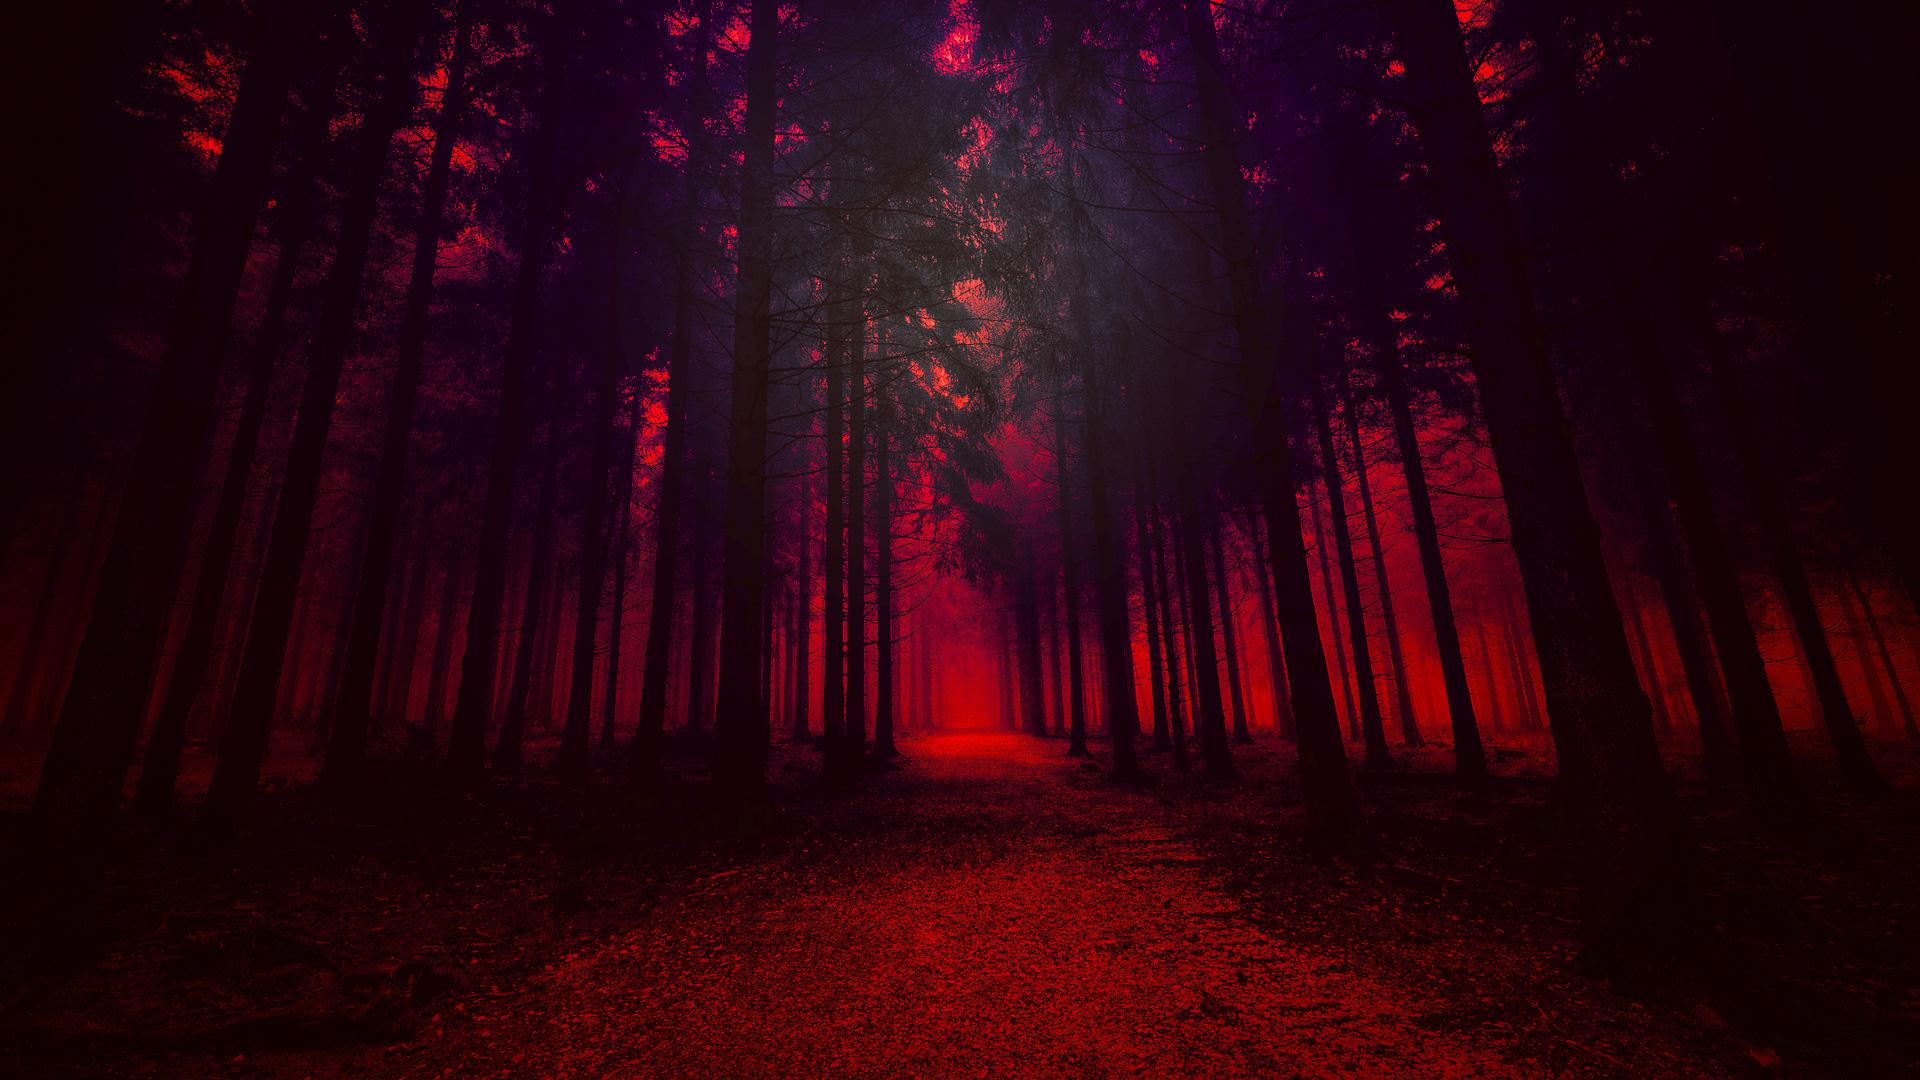 Artistic Red Forest, HD Nature, 4k Wallpaper, Image